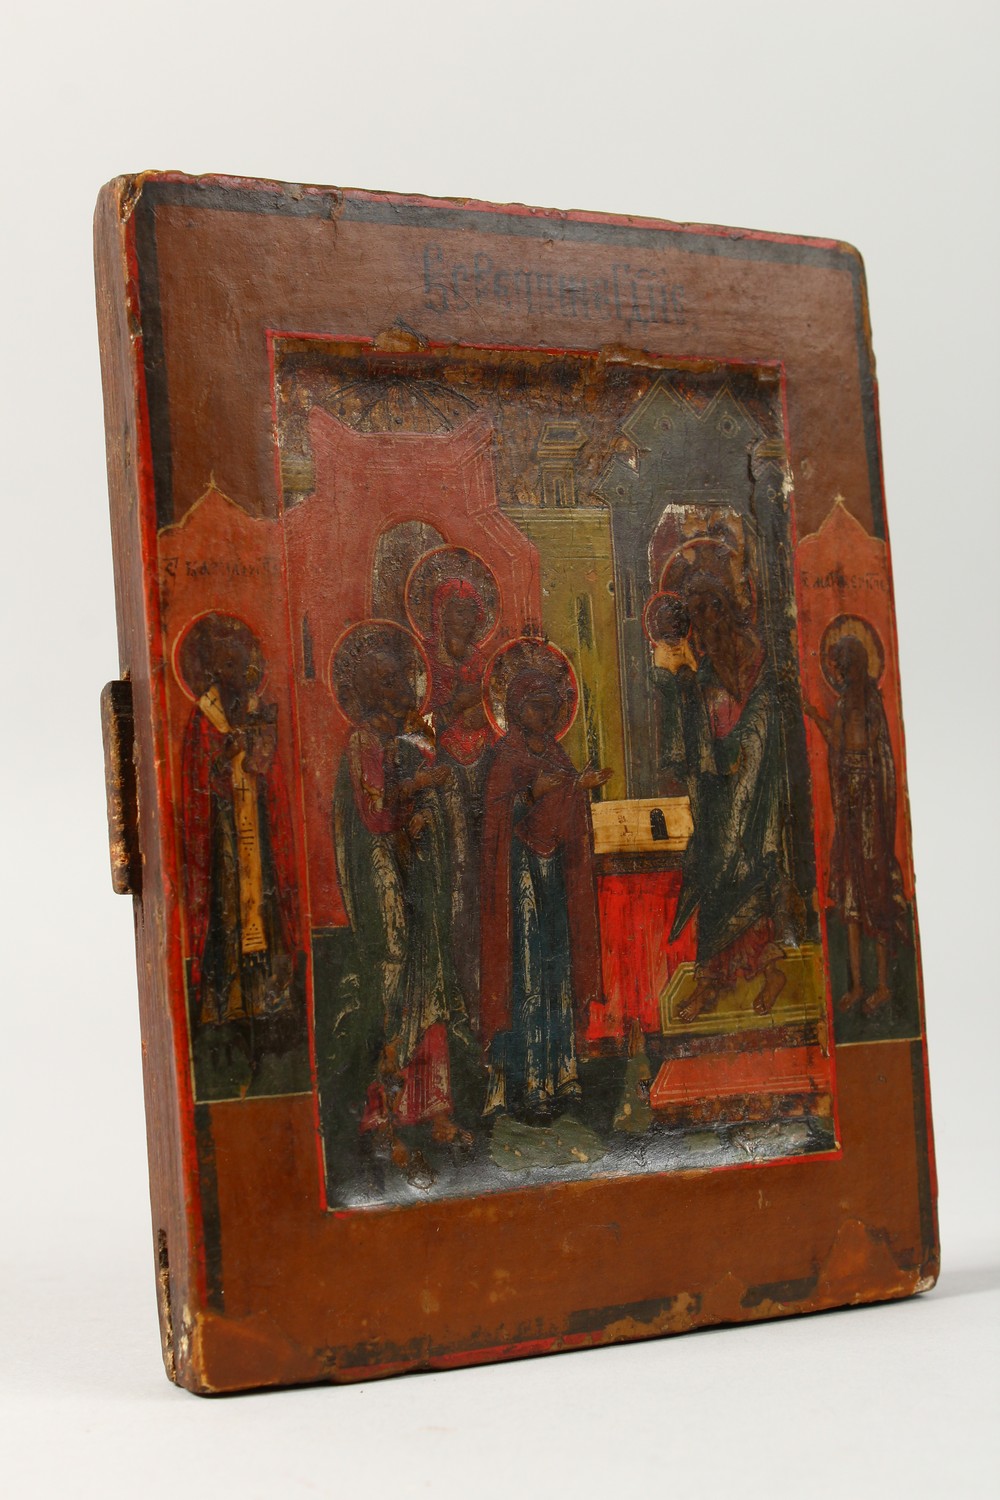 AN EARLY 18TH CENTURY RUSSIAN ICON, on panel. 6.5ins x 5ins. - Image 2 of 6